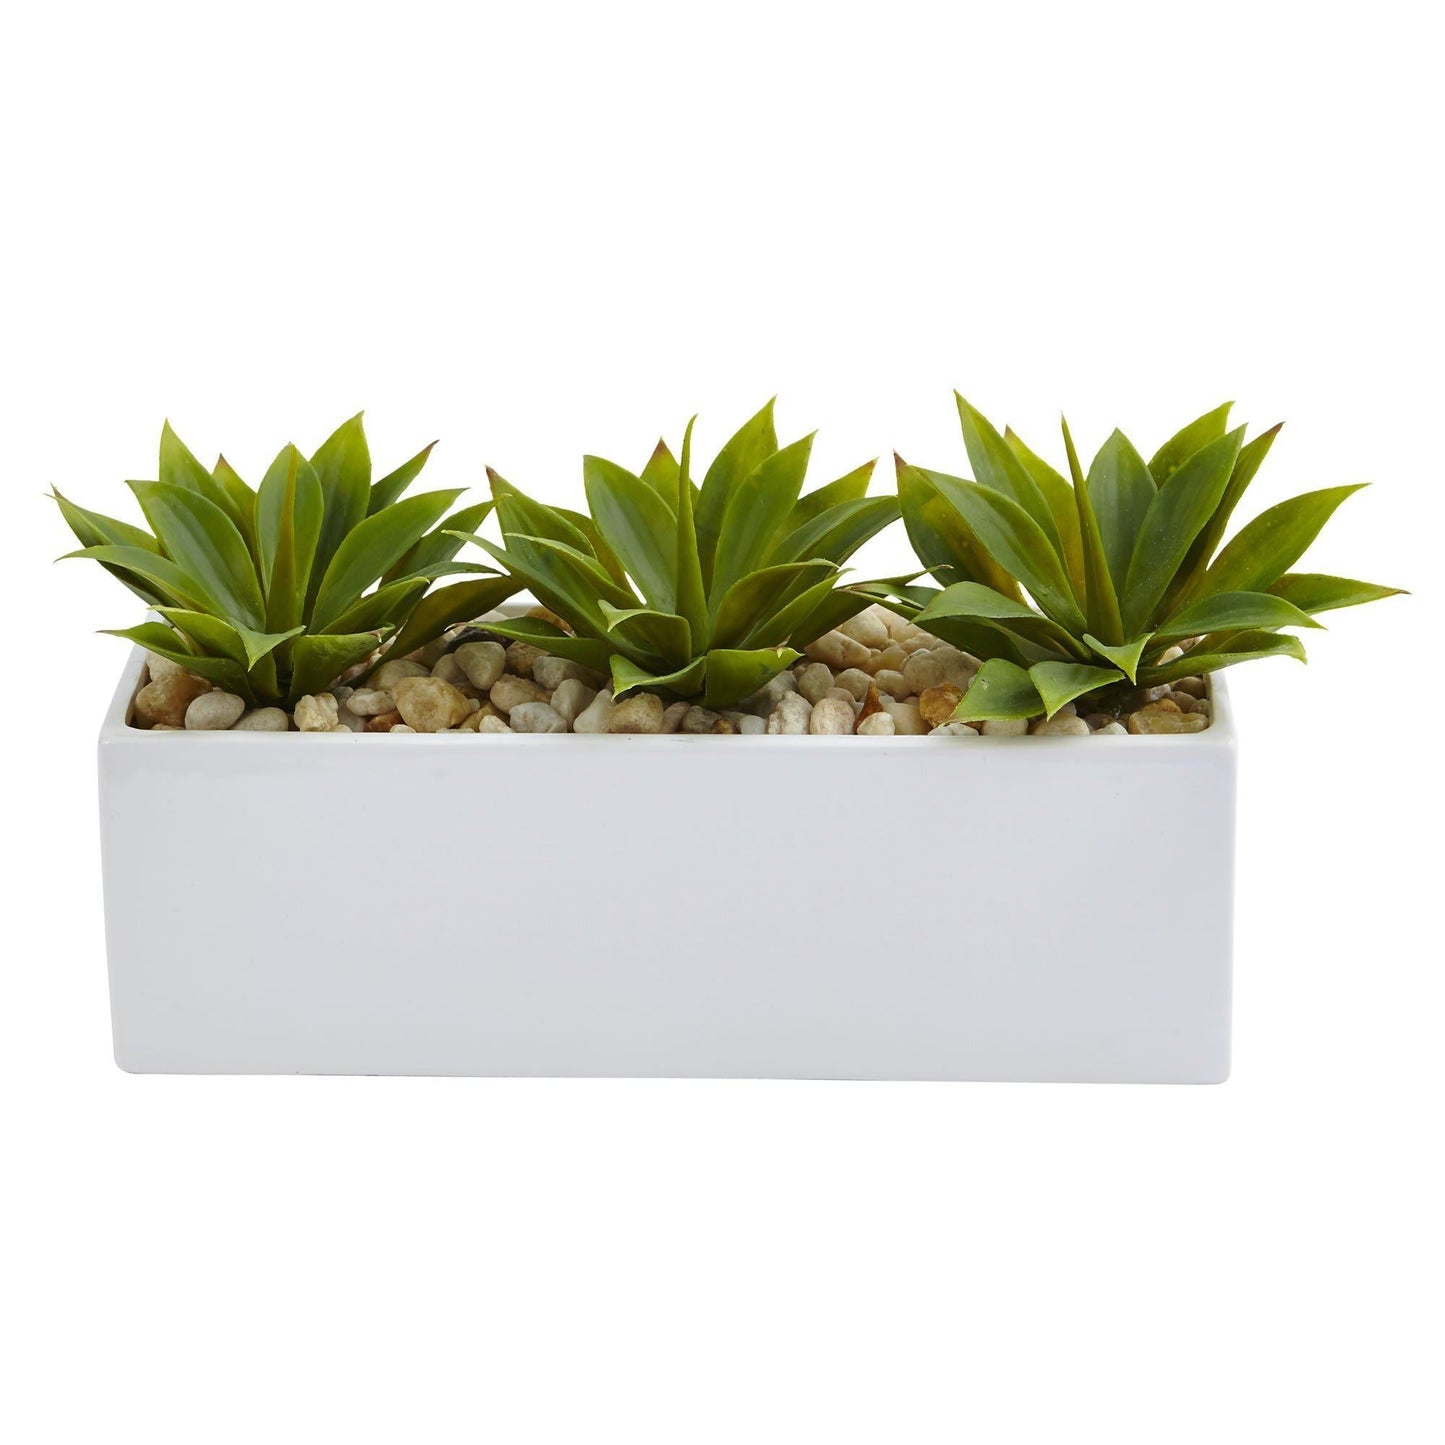 Agave Succulent in Rectangular Planter by Nearly Natural